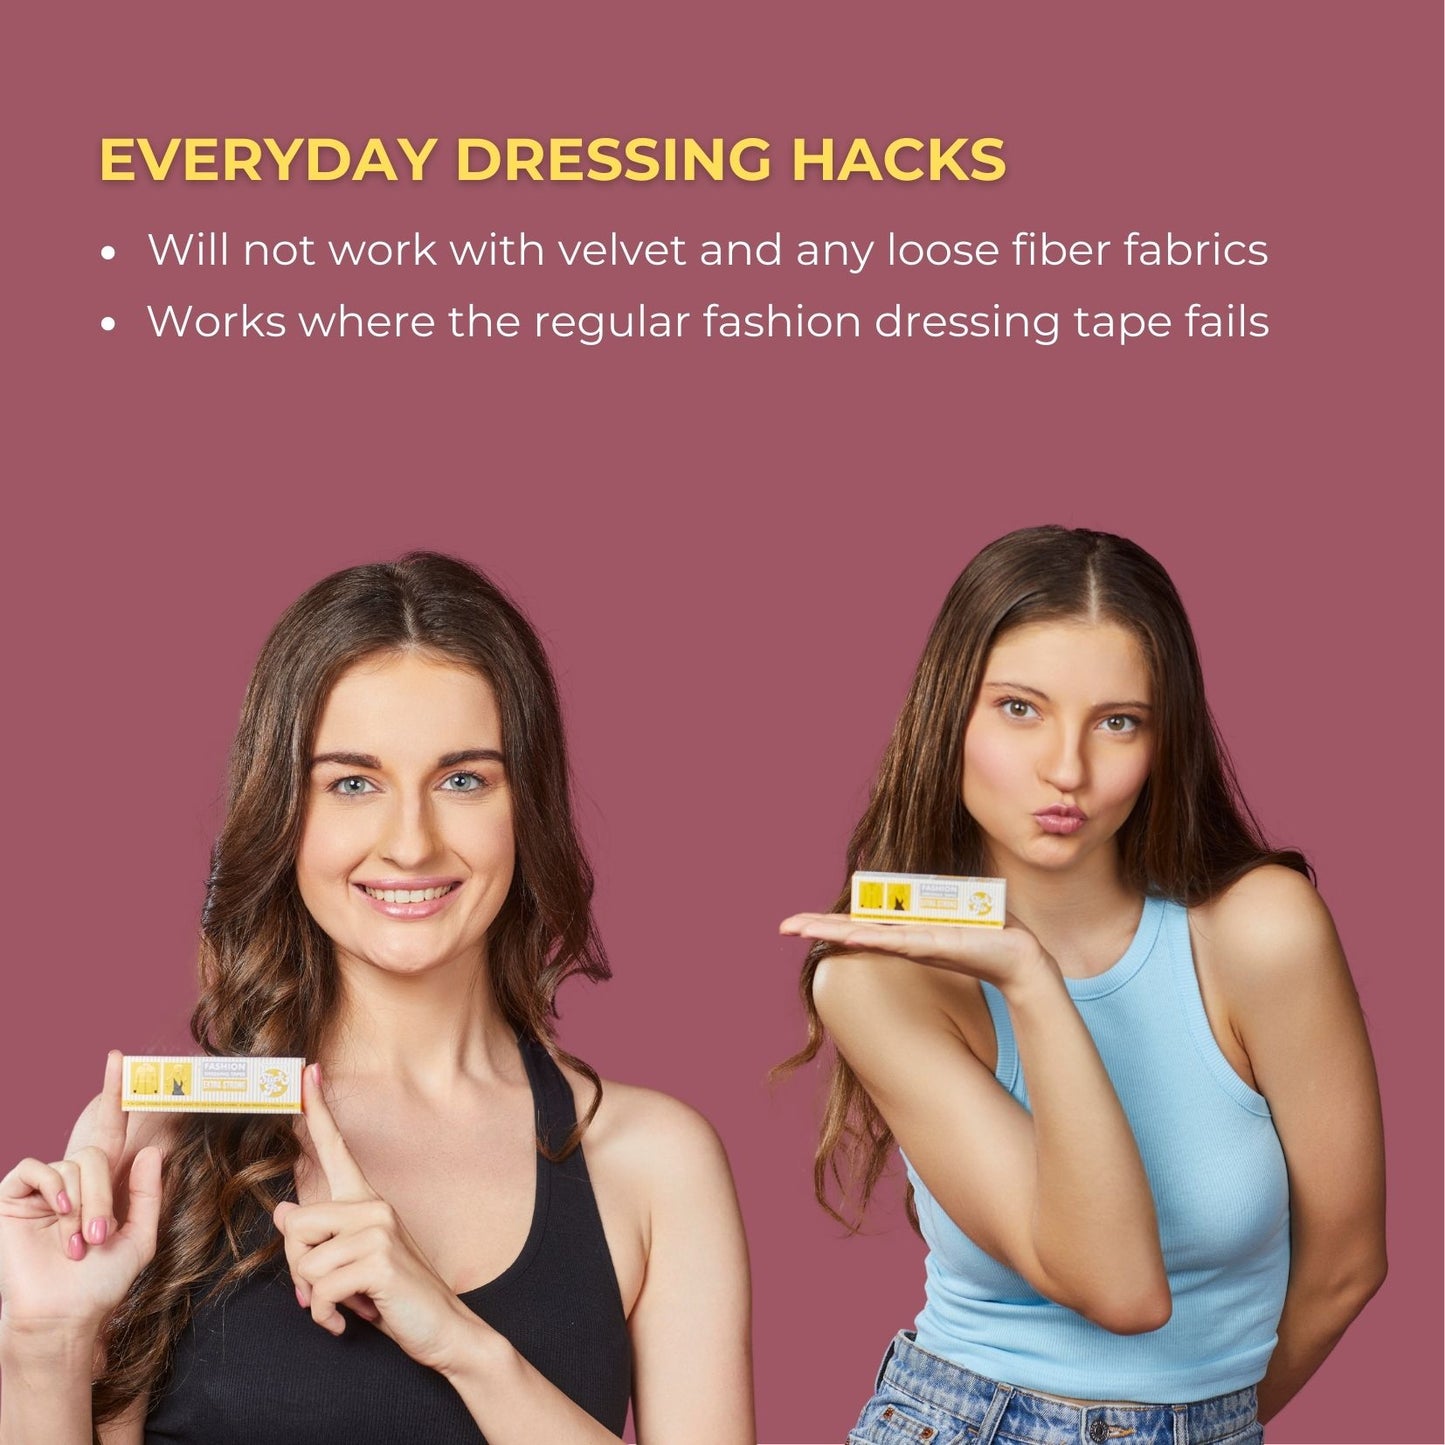 SlickFix Extra Strong Fashion Dressing Tape